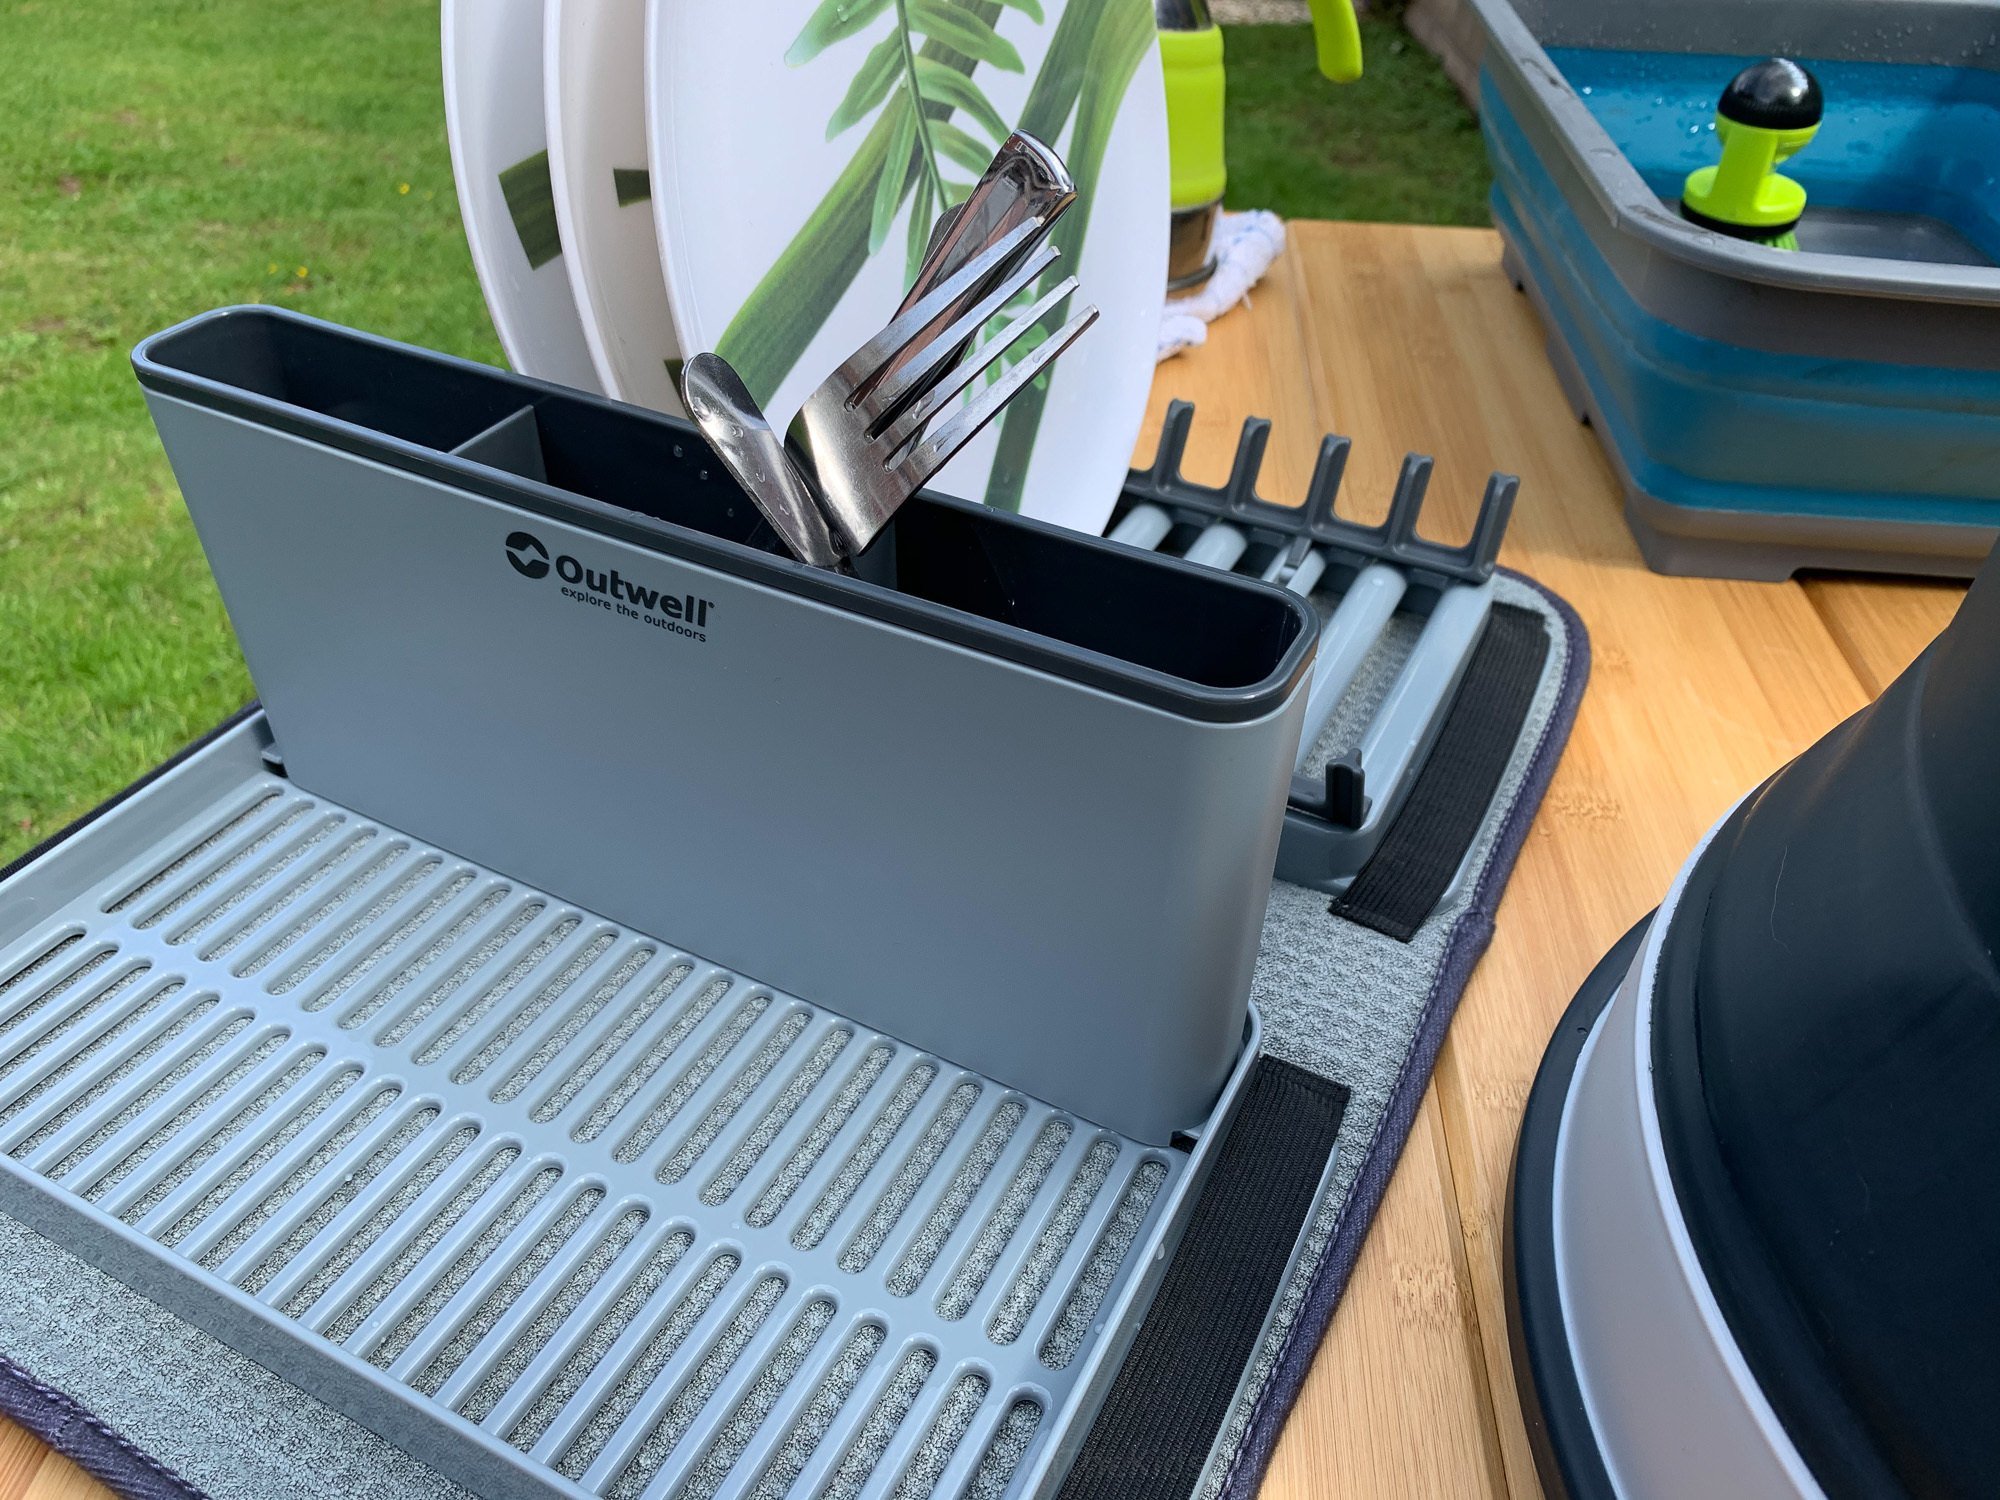 The Outwell Dunton dish rack in use